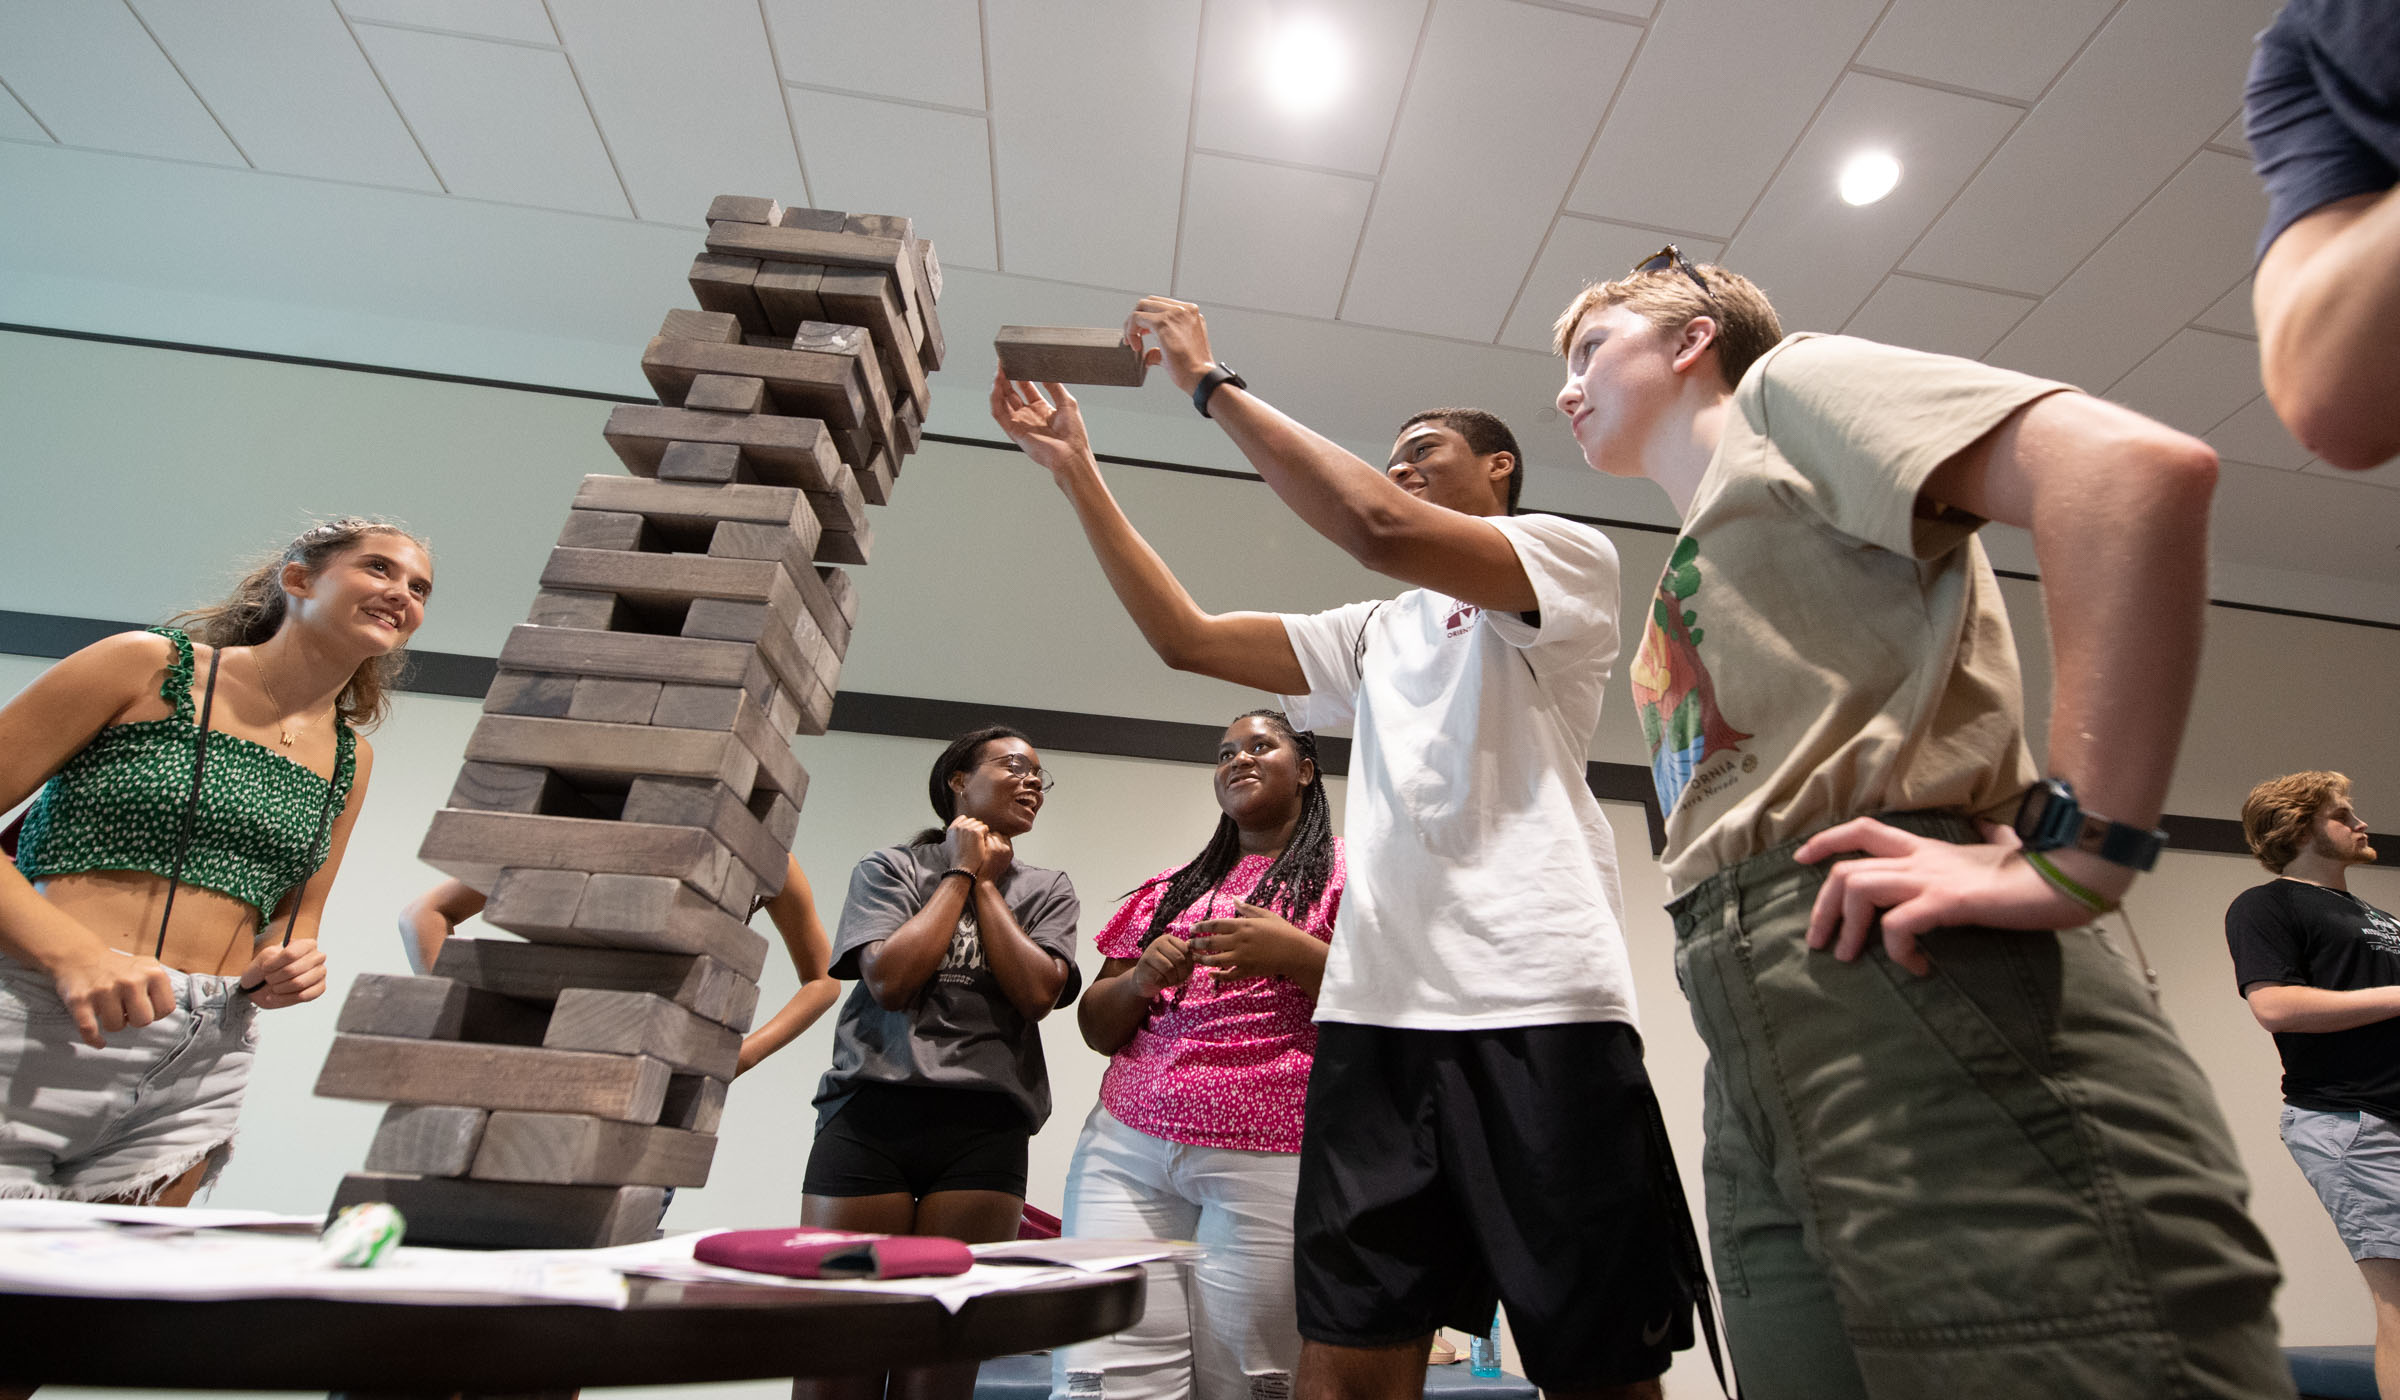 A student reaches to add a block to a tall Jenga tower balanced on a tabletop while other students cheer him on.